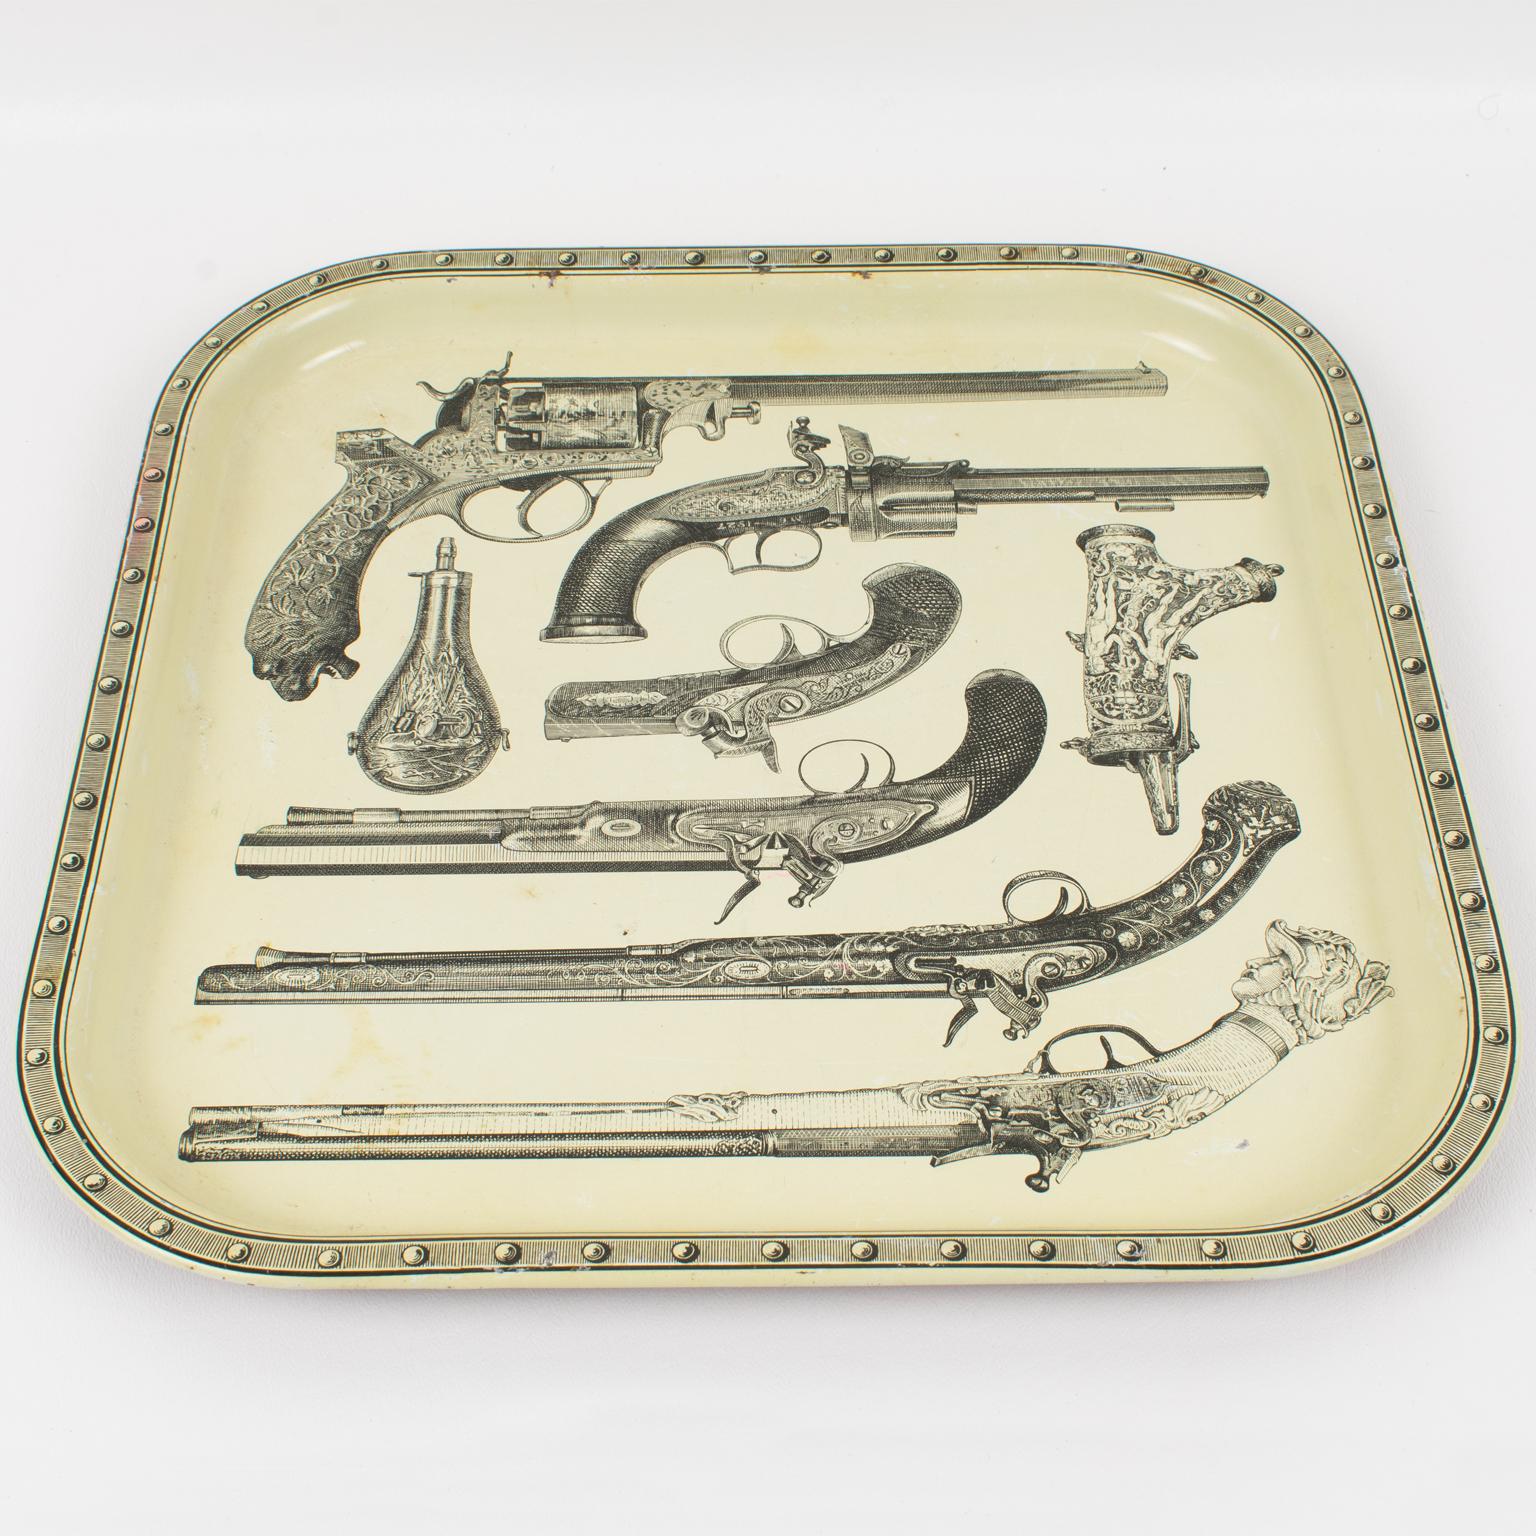 Studio Fornasetti pistol tray from the 1960s, design attributed to Piero Fornasetti, Italy. Very decorative square enameled metal tray featuring a cool and quirky print of antique pistols, guns, and gunpowder pouches. The underside has a printed